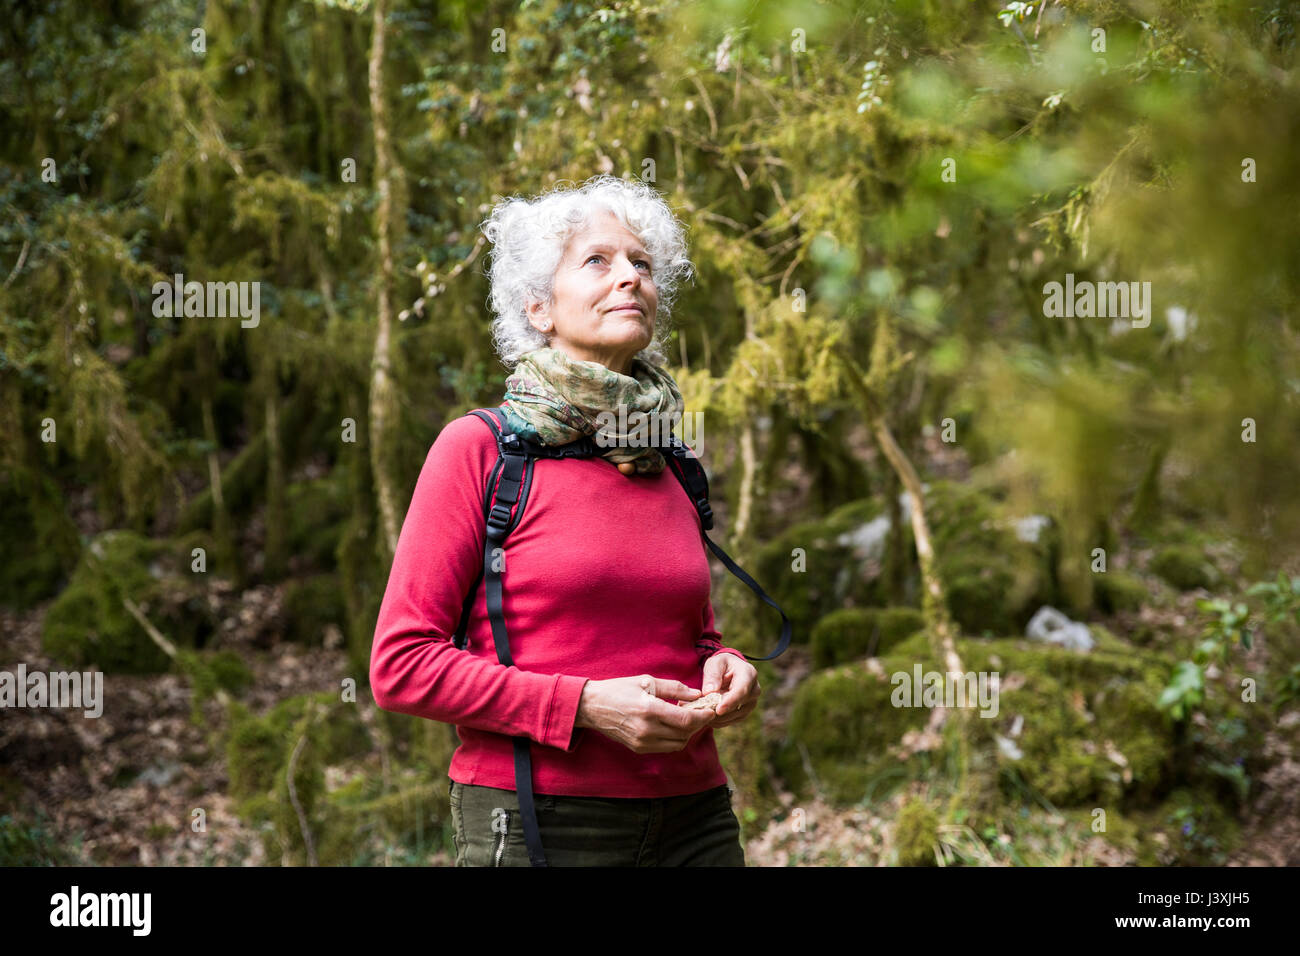 Woman hiker looking up, Bruniquel, France Stock Photo